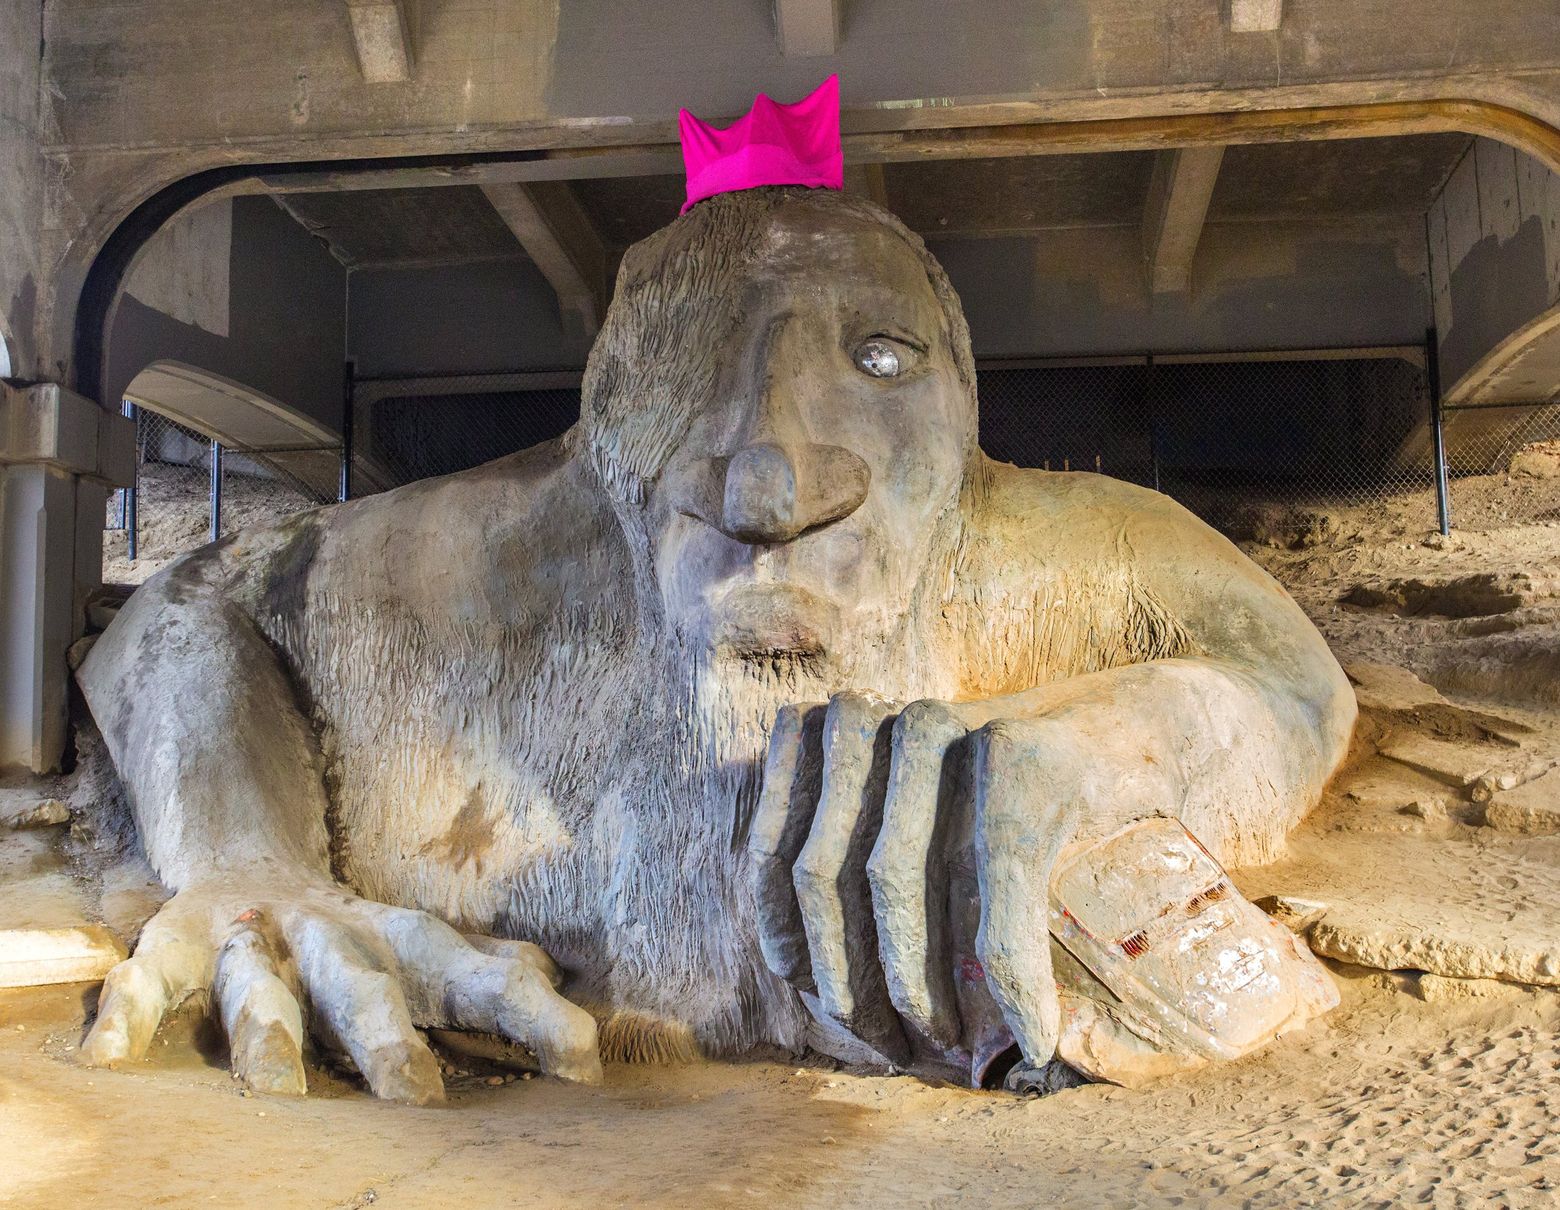 The Fremont Troll was outfitted with a pussyhat ahead of Saturday’s Womxn’s...